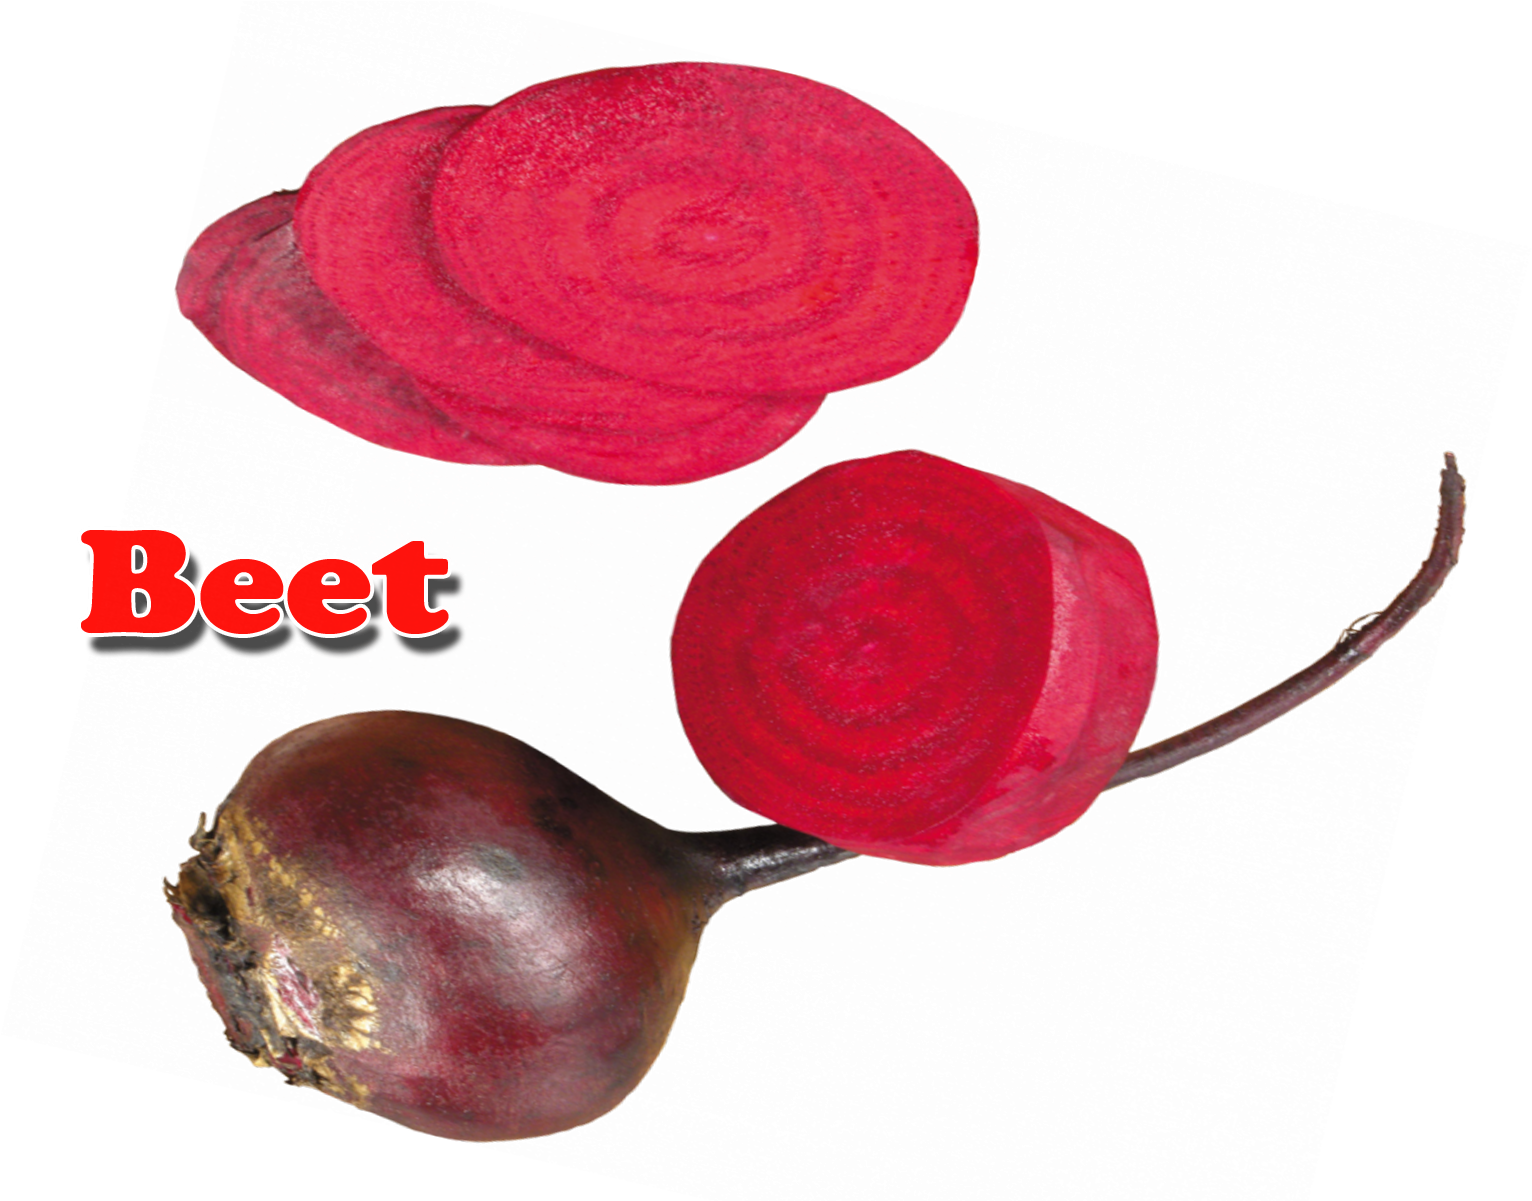 A Beet Sliced And Sliced